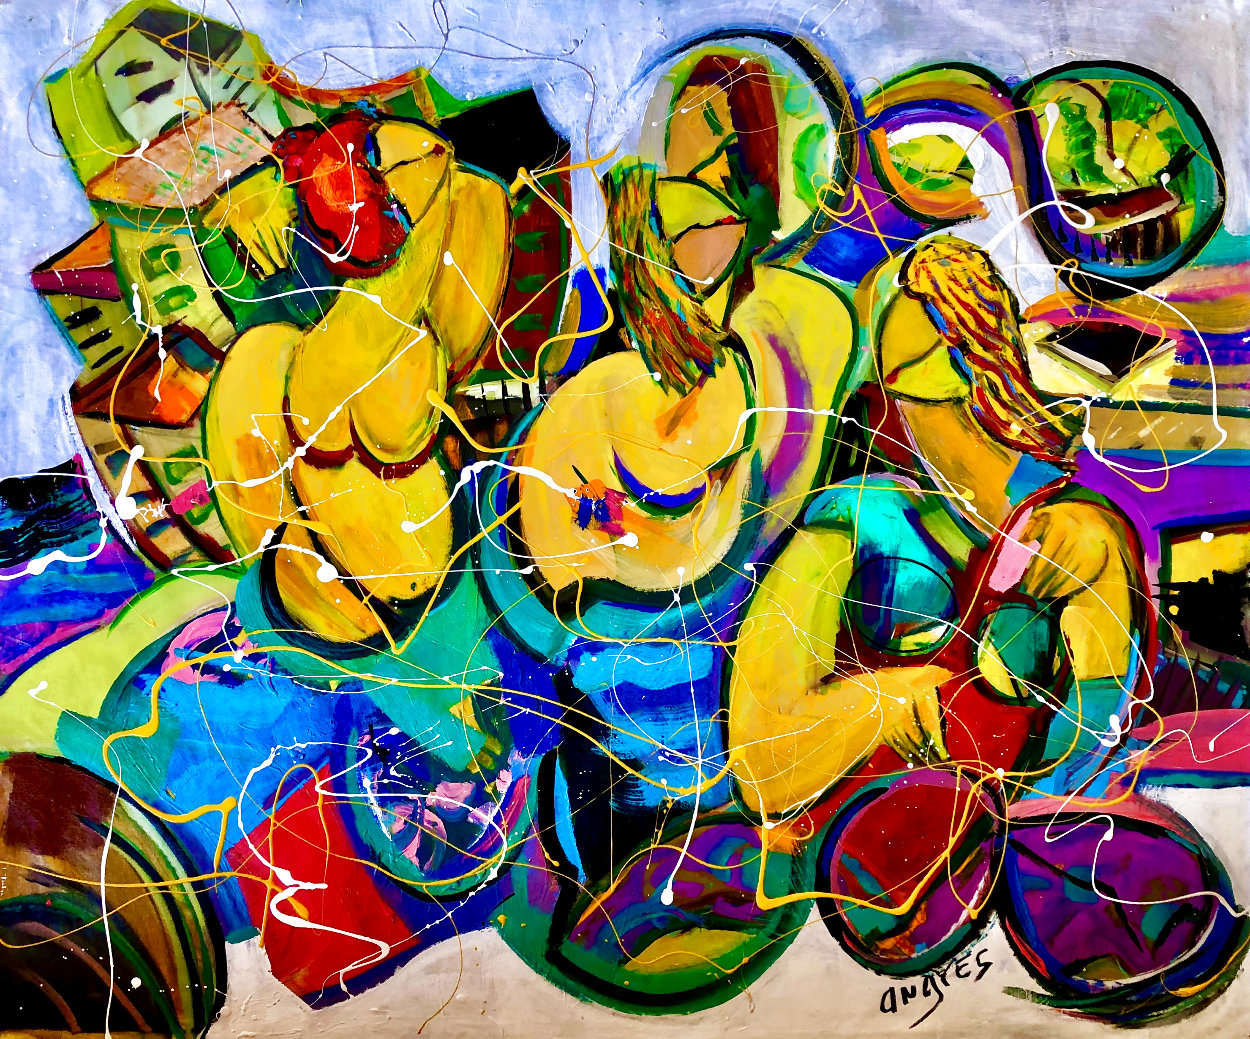 Spring Break, Miami 2020 46x52 Huge Original Painting by Giora Angres